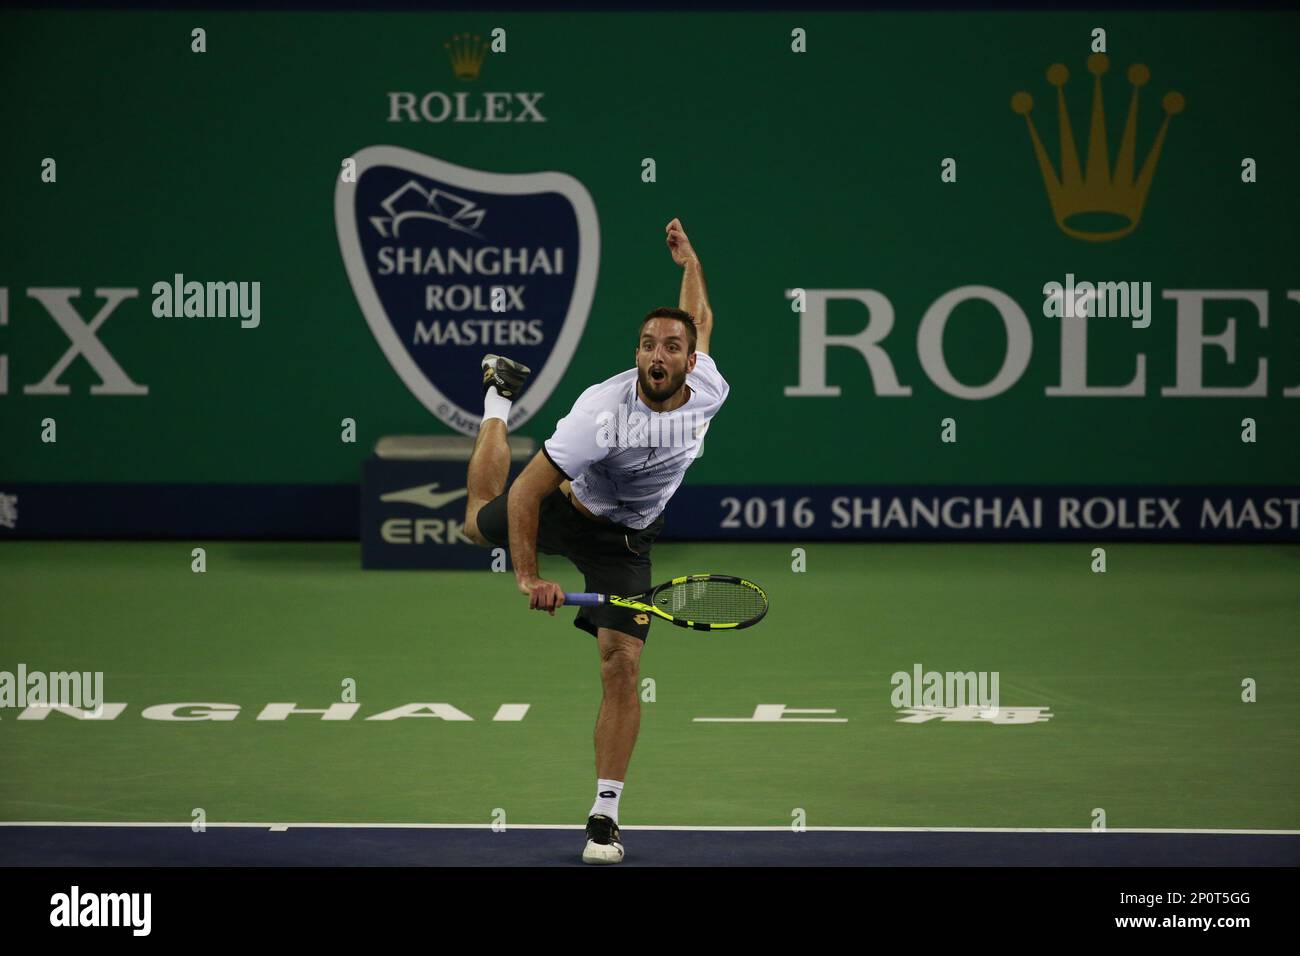 Viktor Troicki of Serbia serves against Rafael Nadal of Spain in their  men's singles second round match during the 2016 Shanghai Rolex Masters  tennis tournament in Shanghai, China, 12 October 2016.Fourth seed